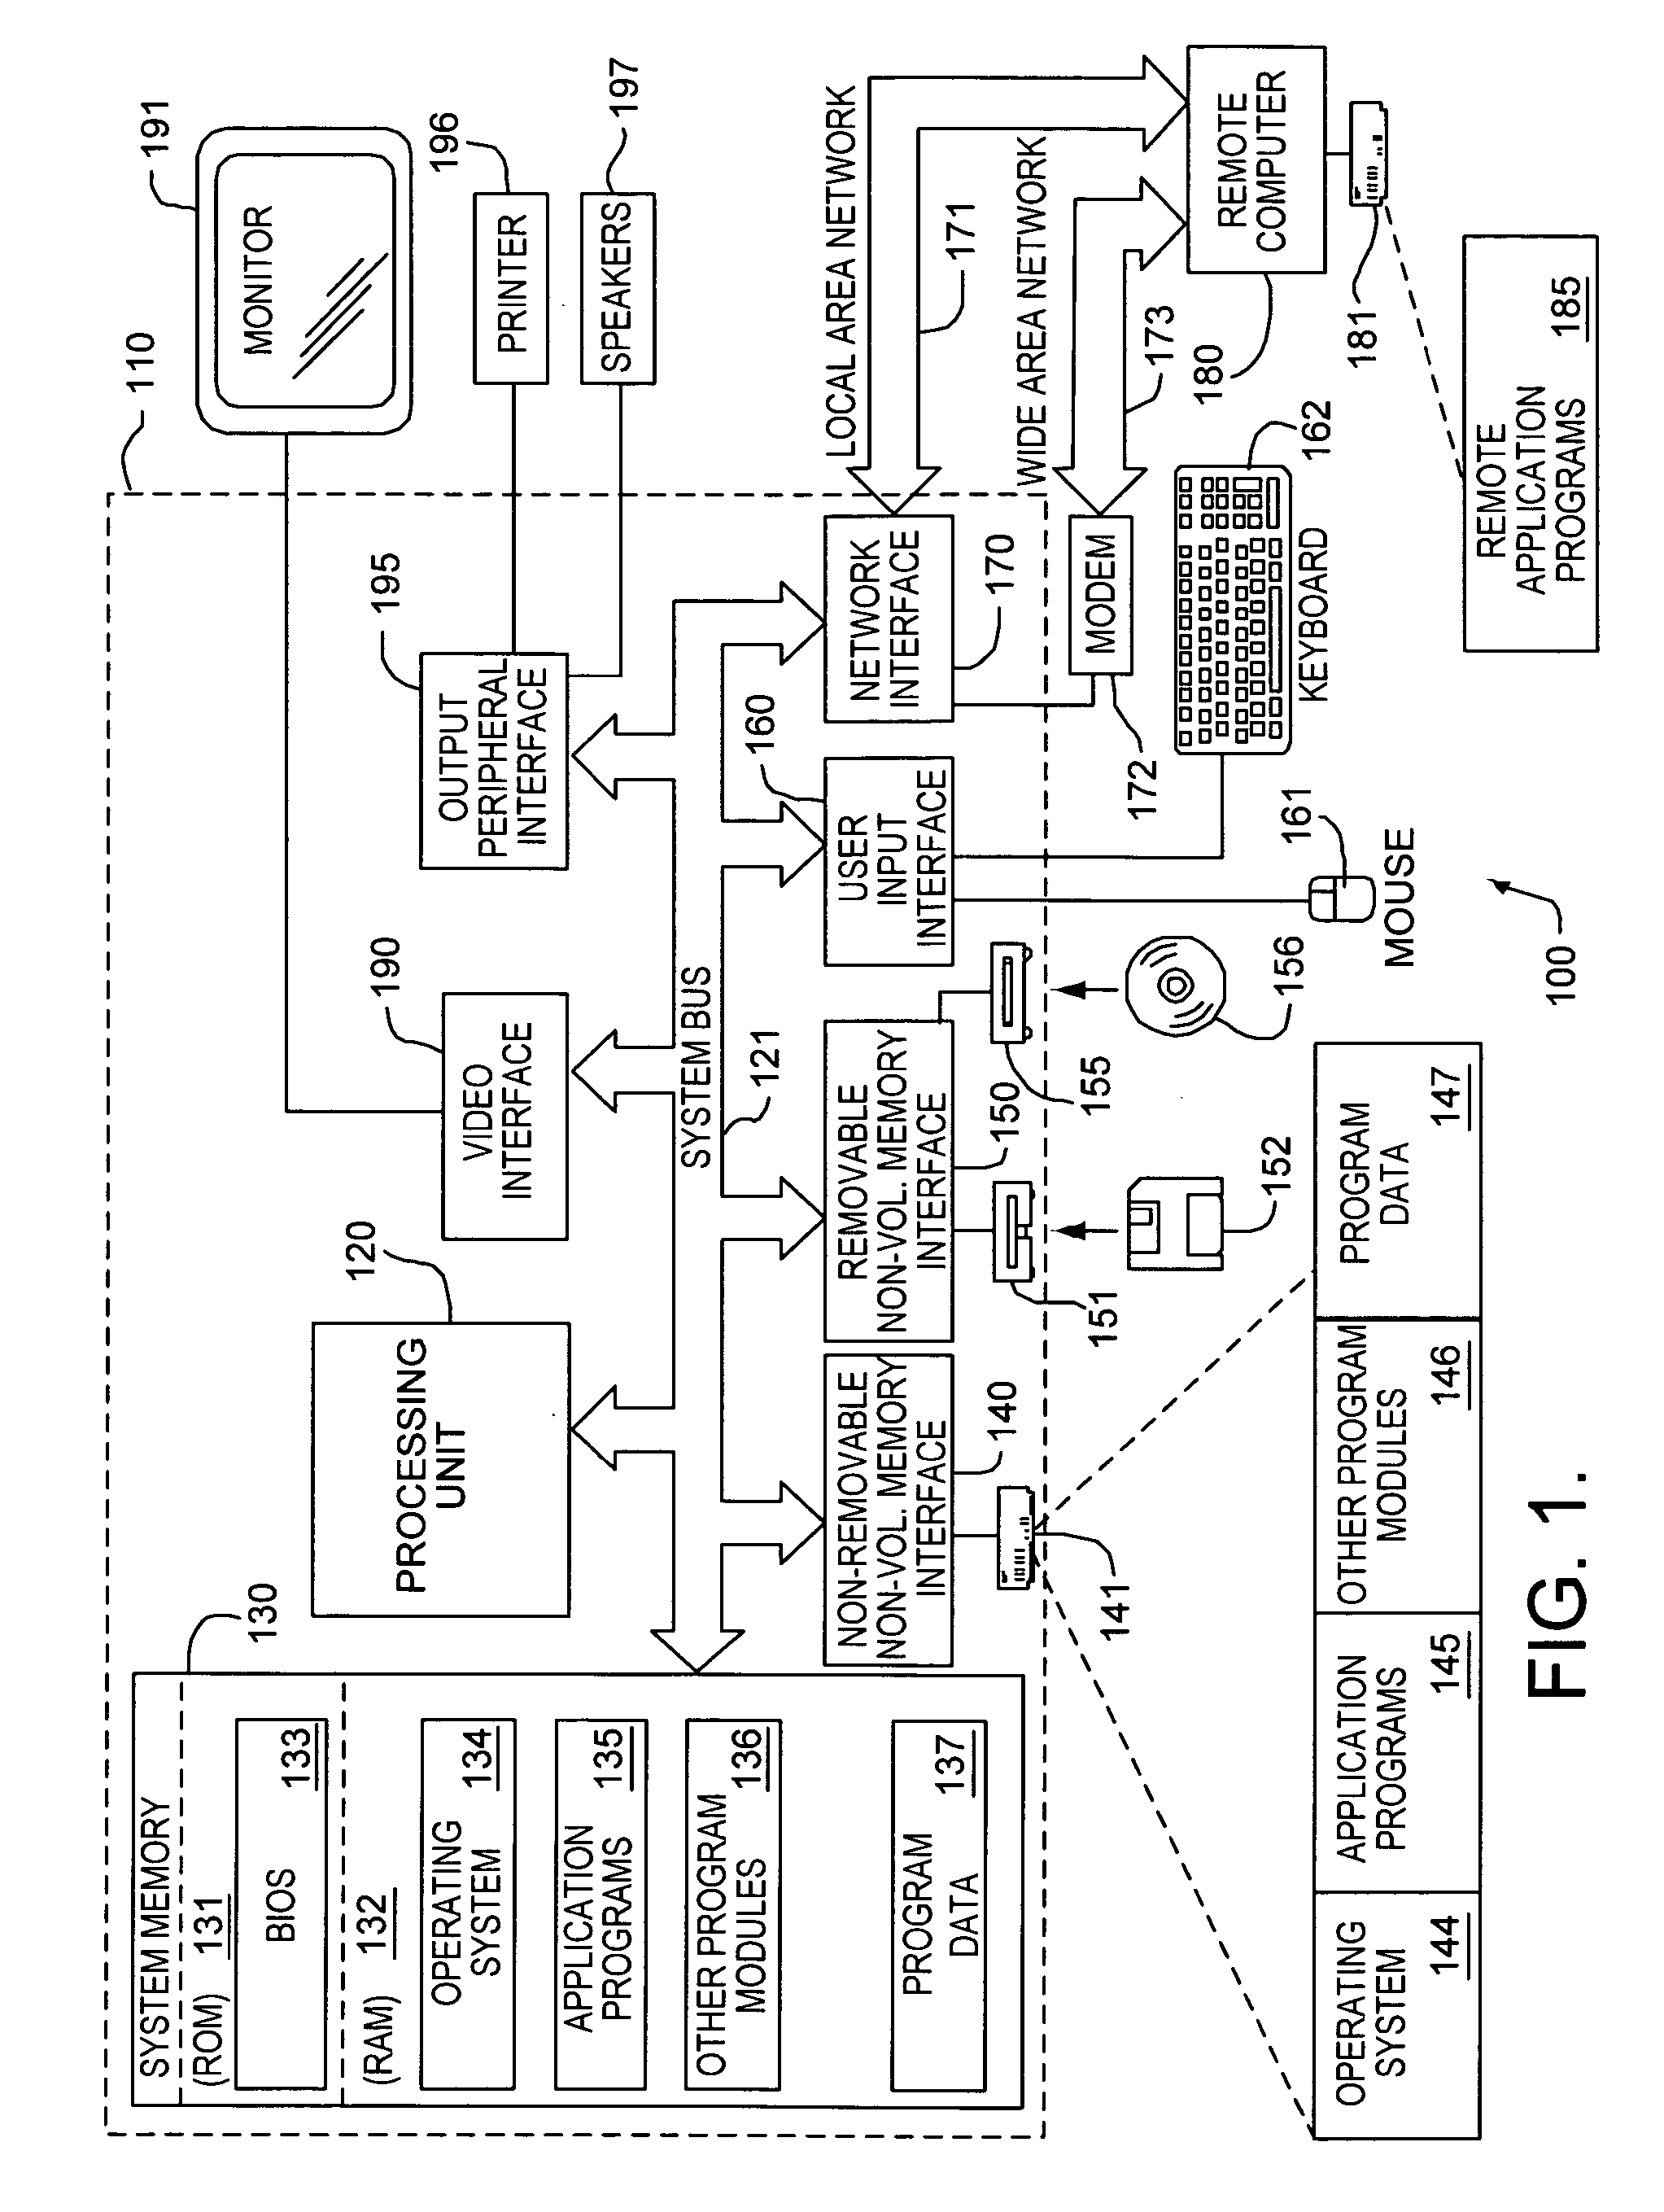 System and method for transferring a file in advance of its use